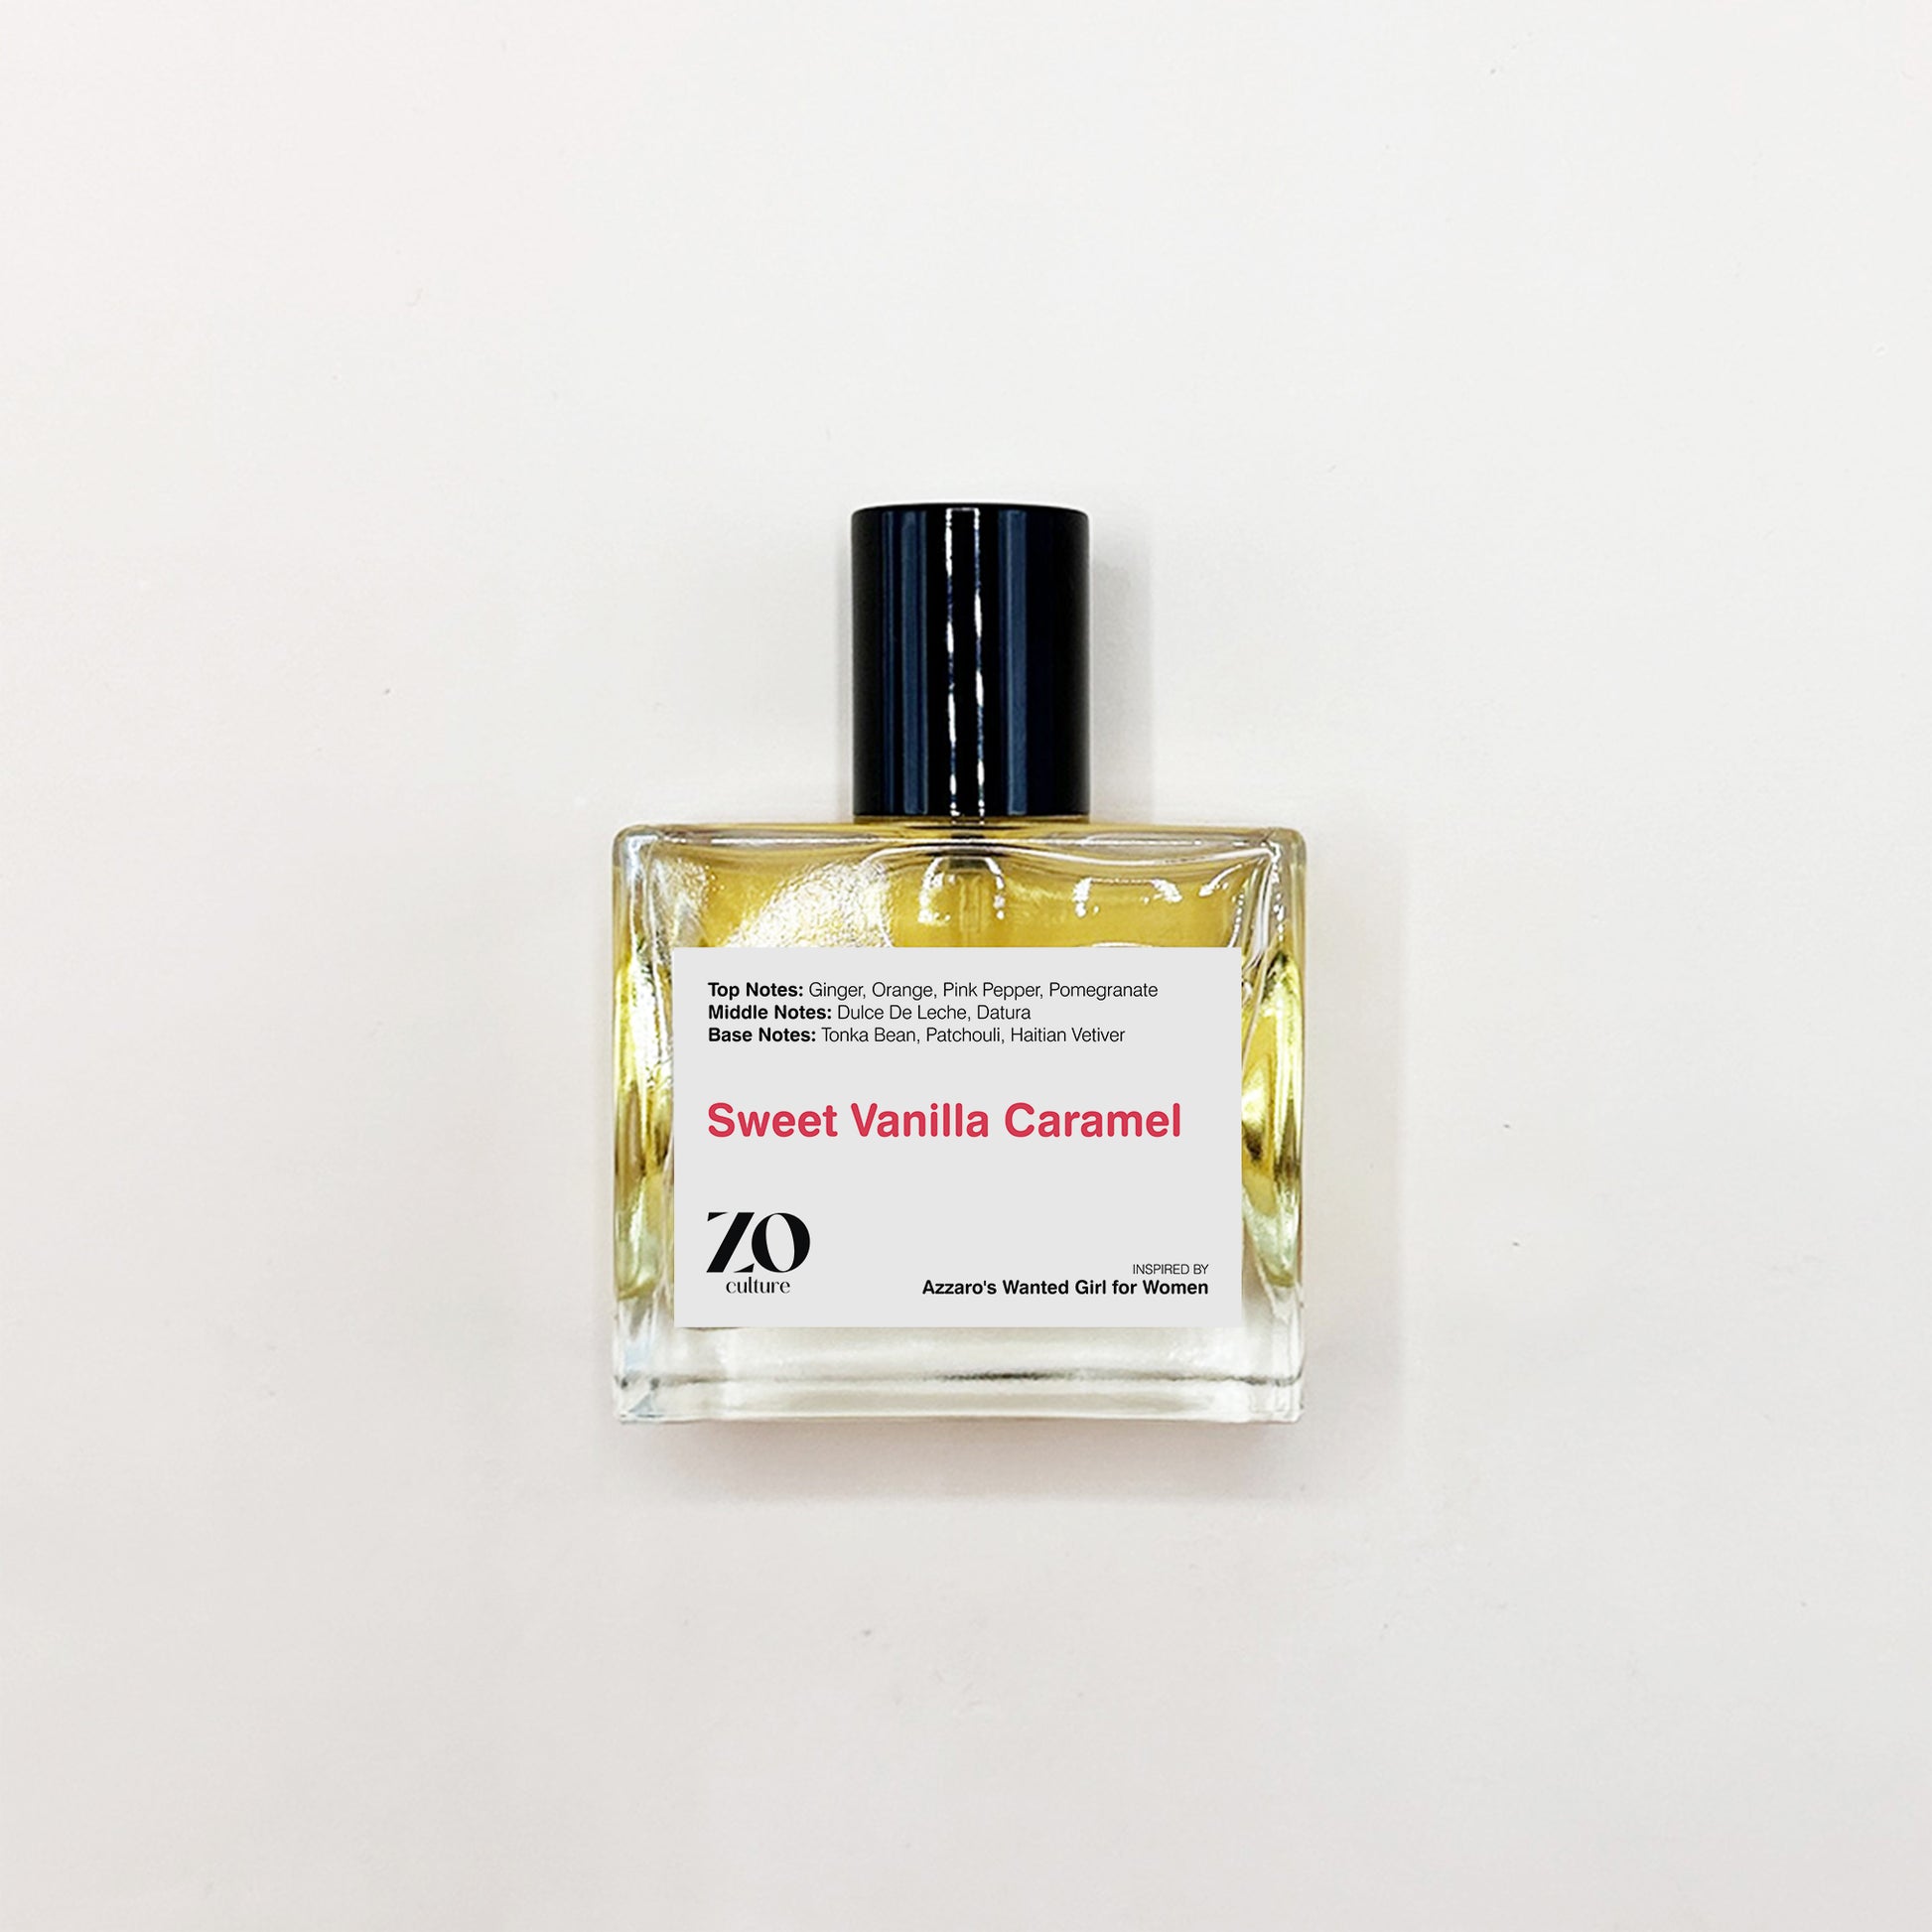 Women Perfume Sweet Vanilla Caramel - Inspired by Wanted Girl for Women ZoCulture